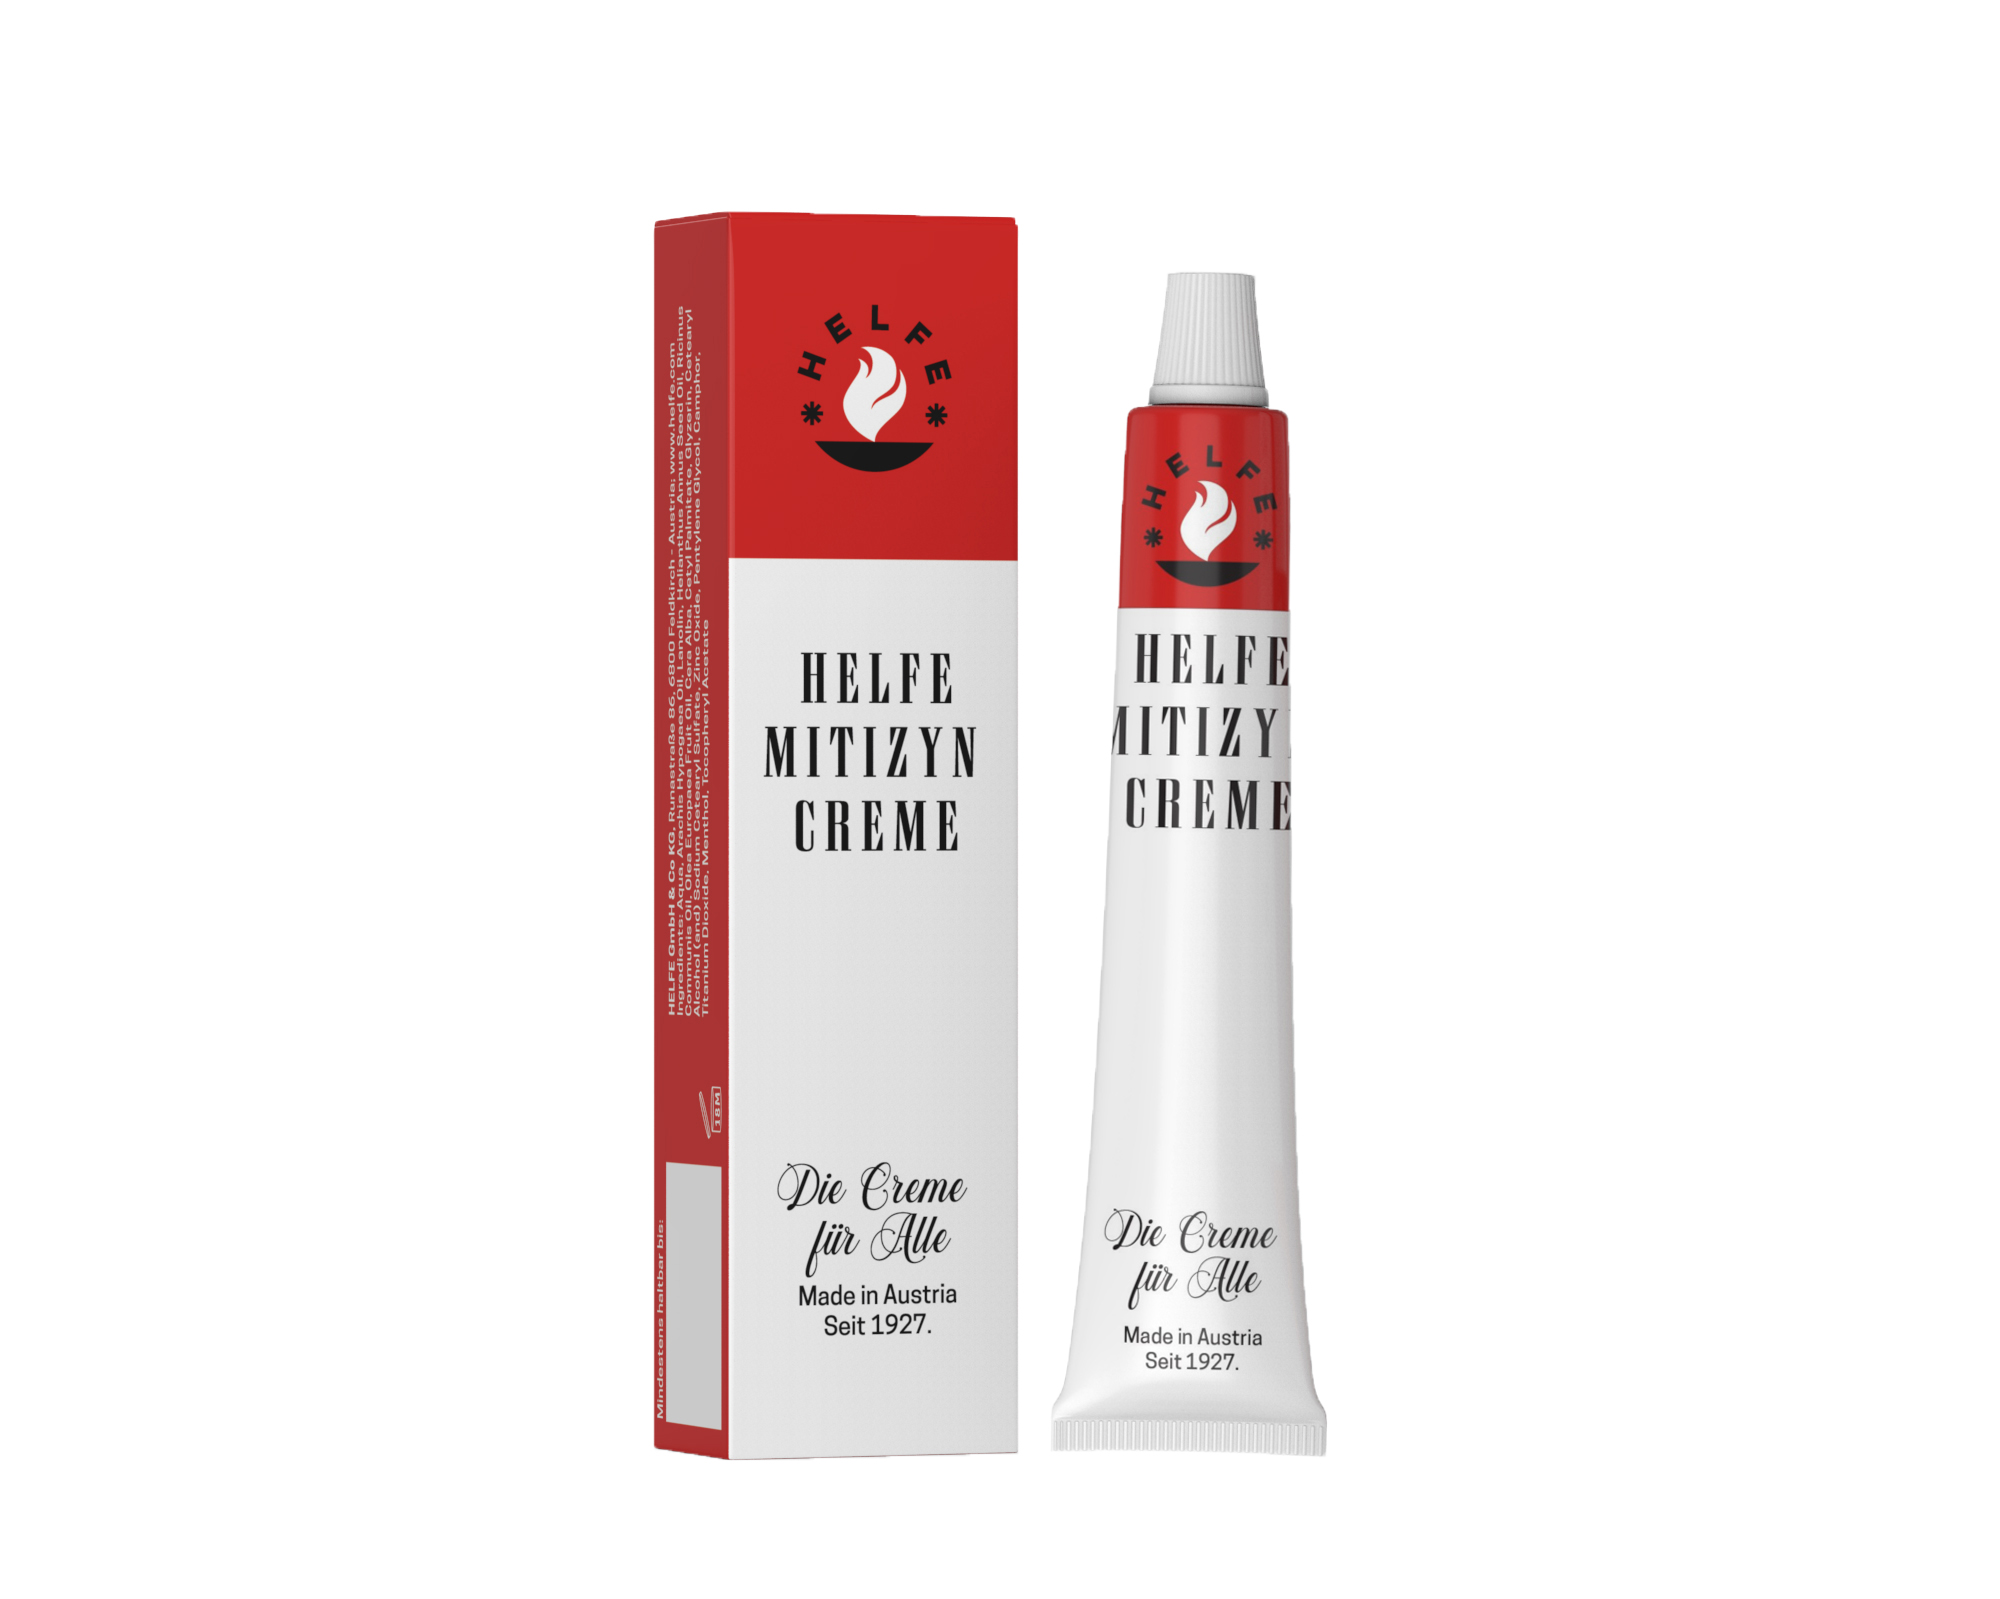 Mititsyn cream from Helfe according to the traditional composition